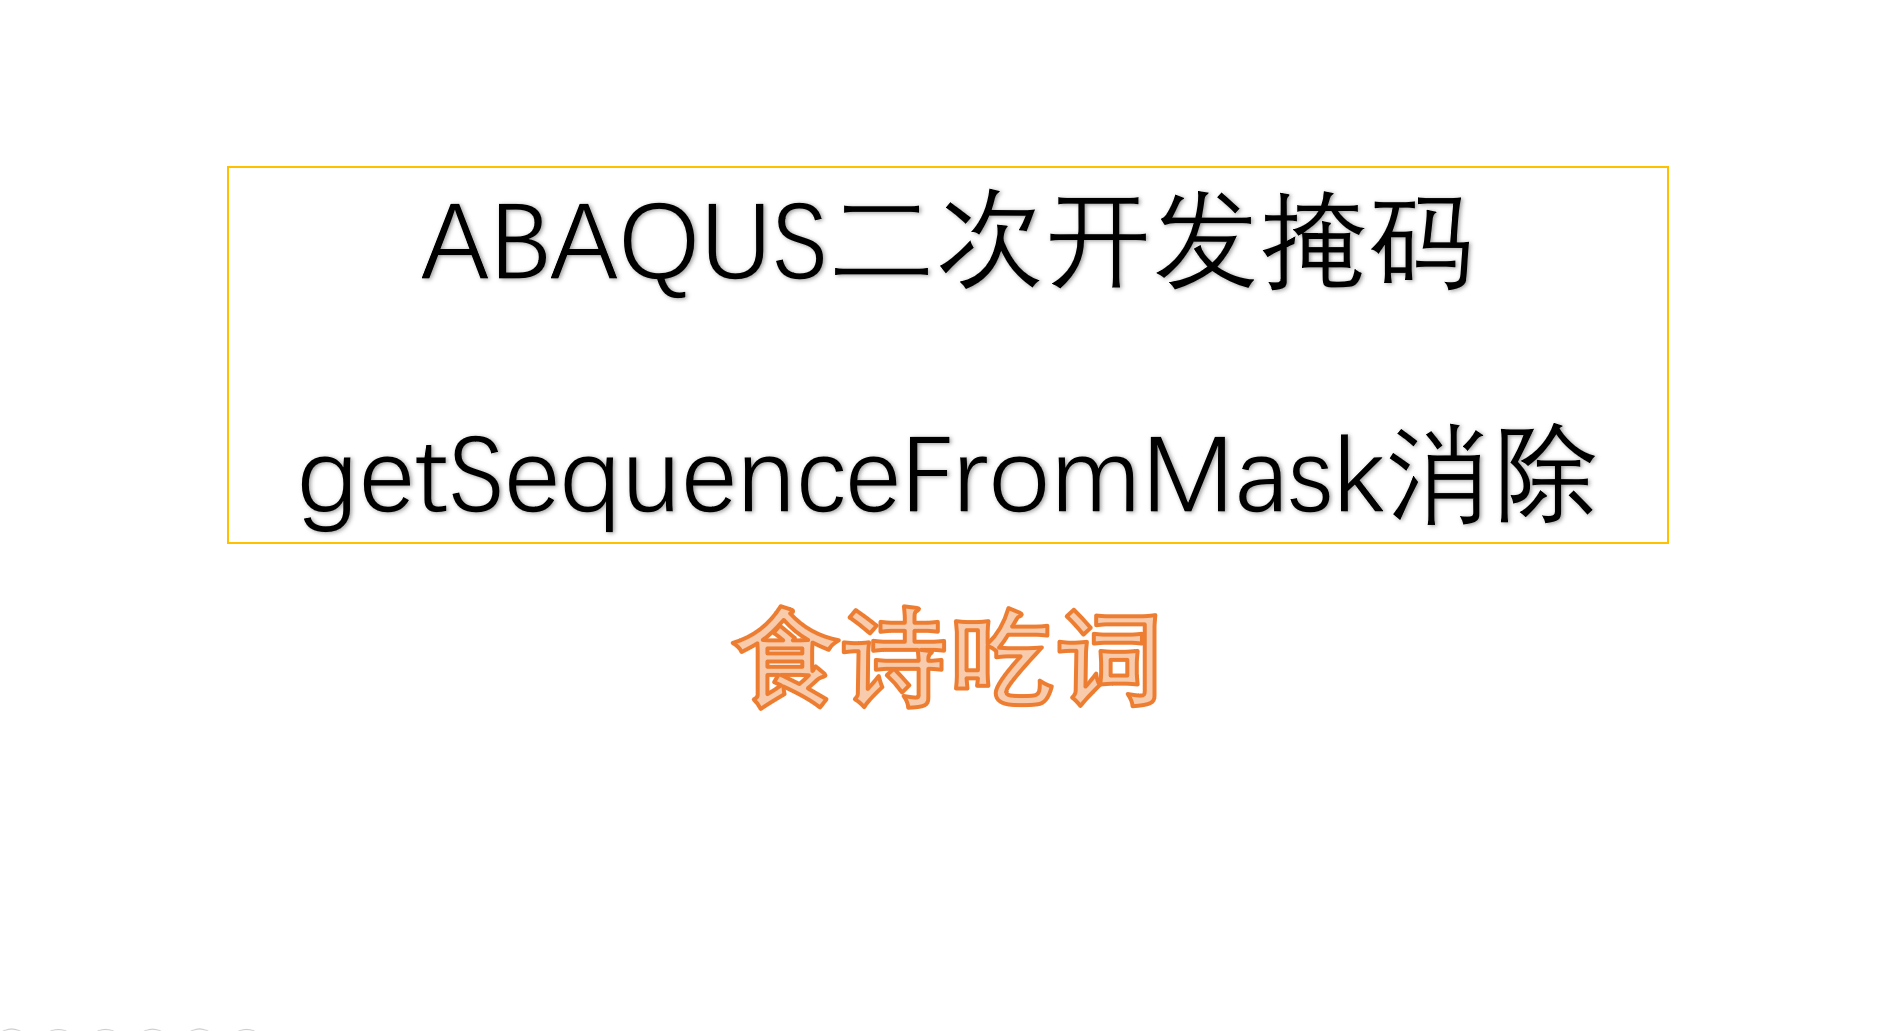 ABAQUS二次开发掩码getSequenceFromMask消除